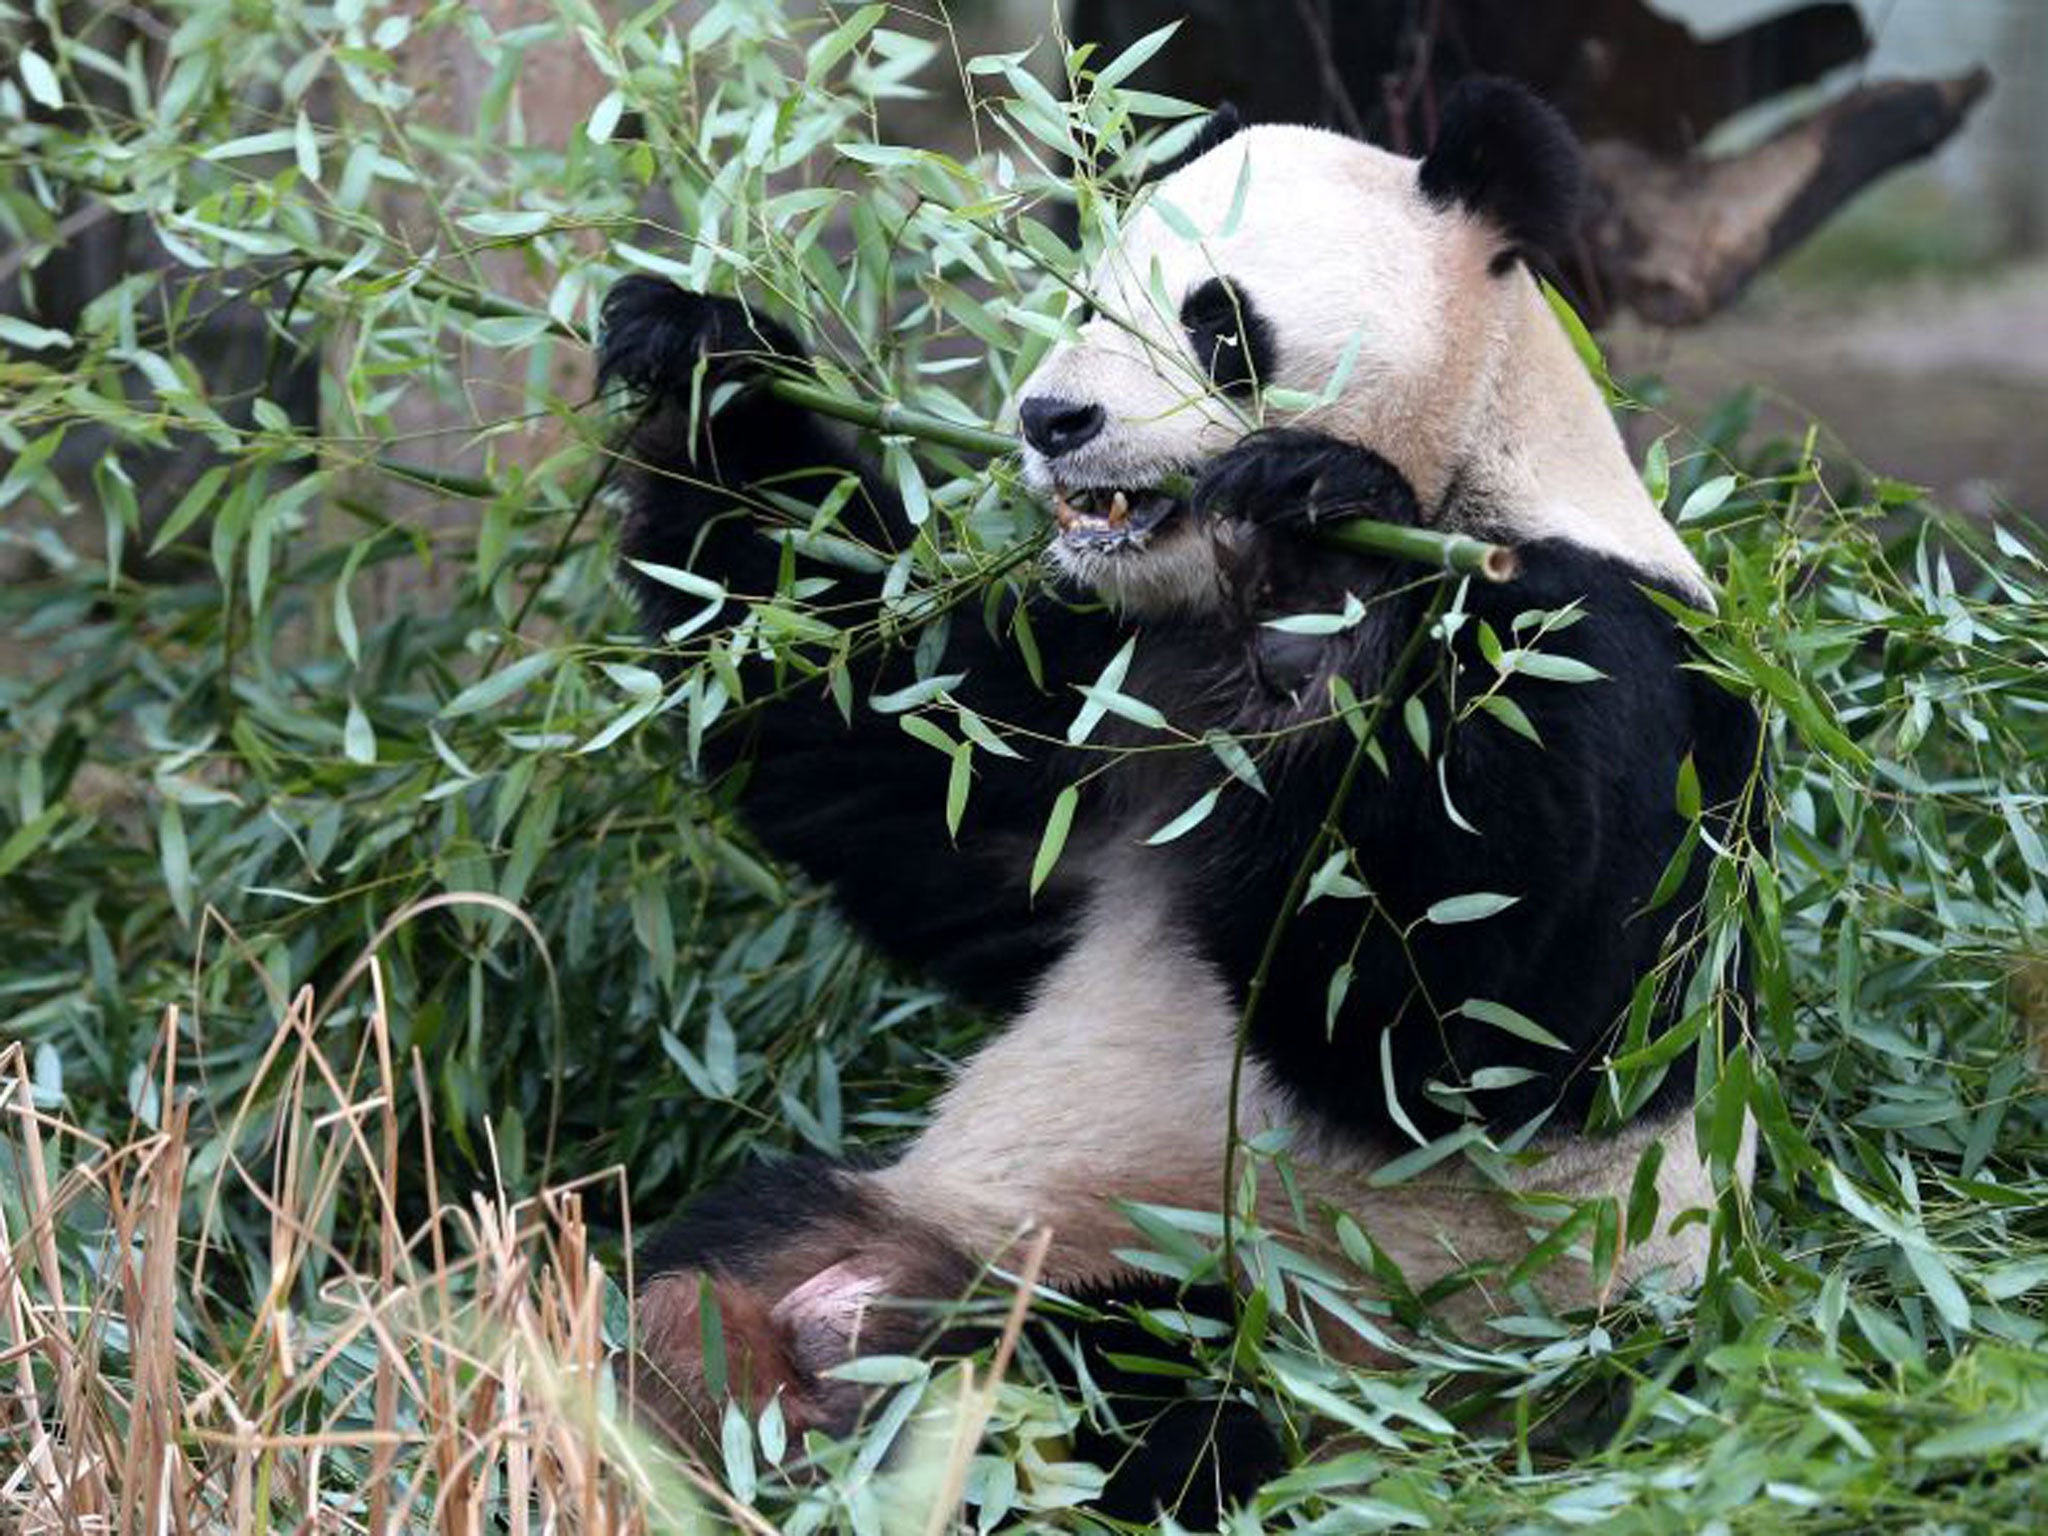 Yang Guang, pictured, and his mate Tian Tian have a 36-hour breeding window